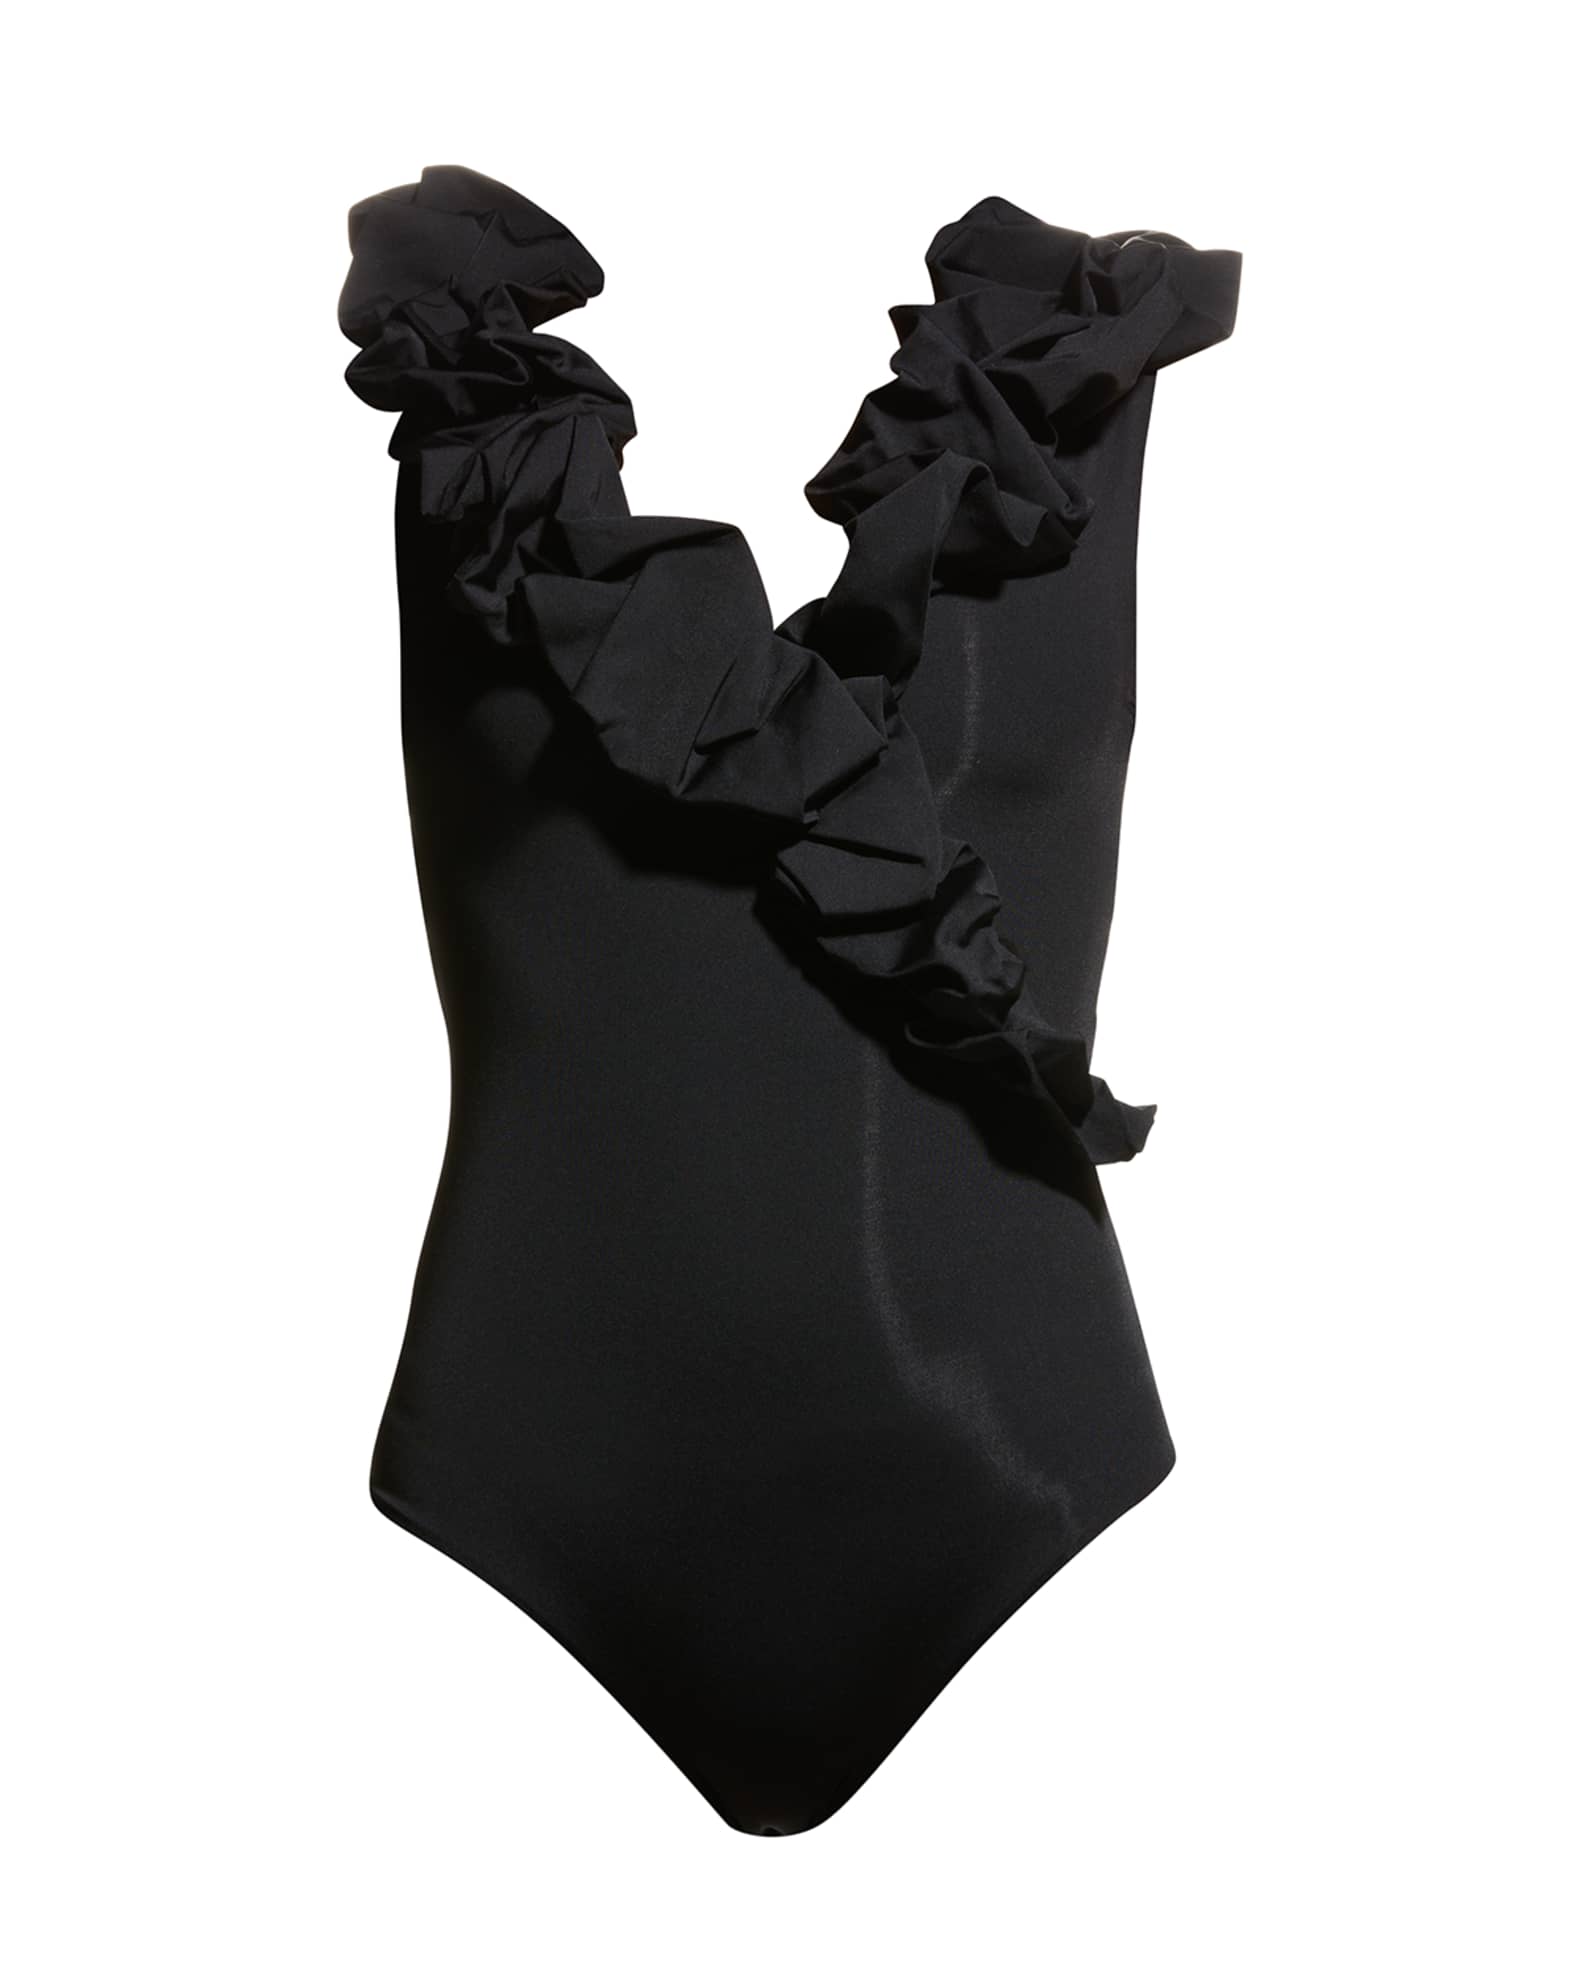 MAYGEL CORONEL from Neiman Marcus - swimsuits - black swimsuit - vacation wear - beach wear - chic